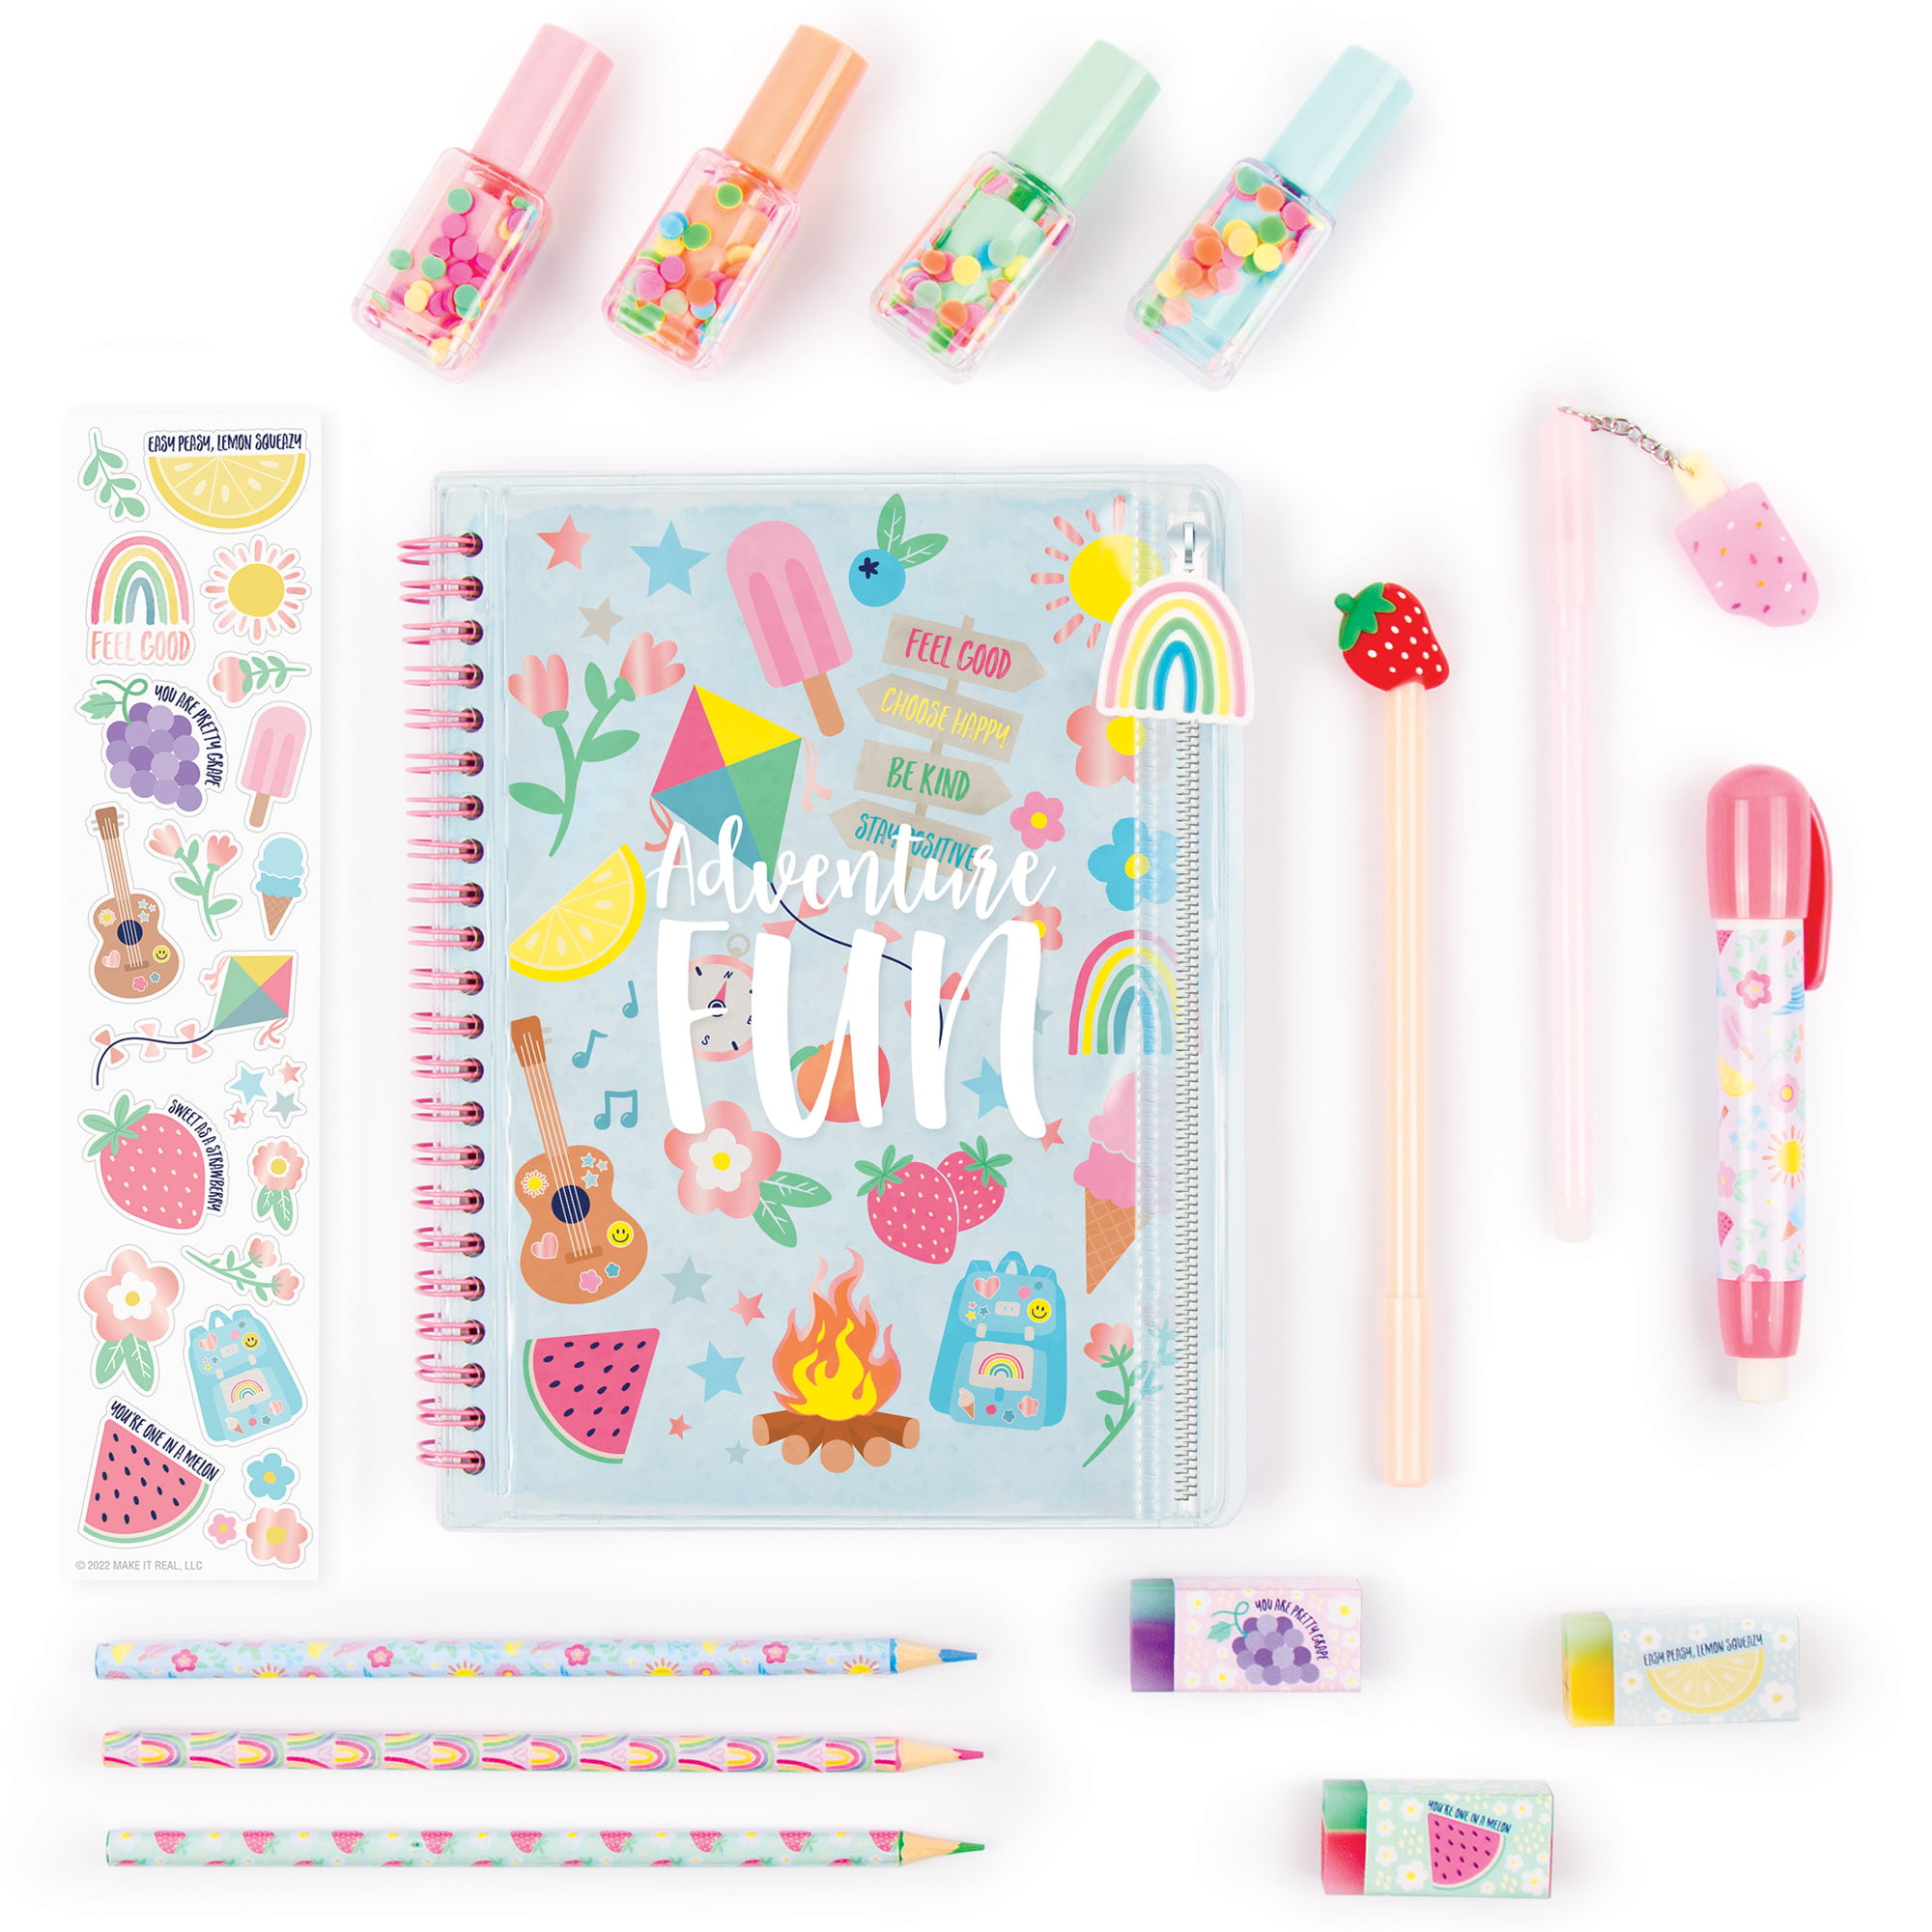 Three Cheers For Girls Butterfly Glitter Pouch & 12 Pack Pen Set 12-pc.  Kids Craft Kit